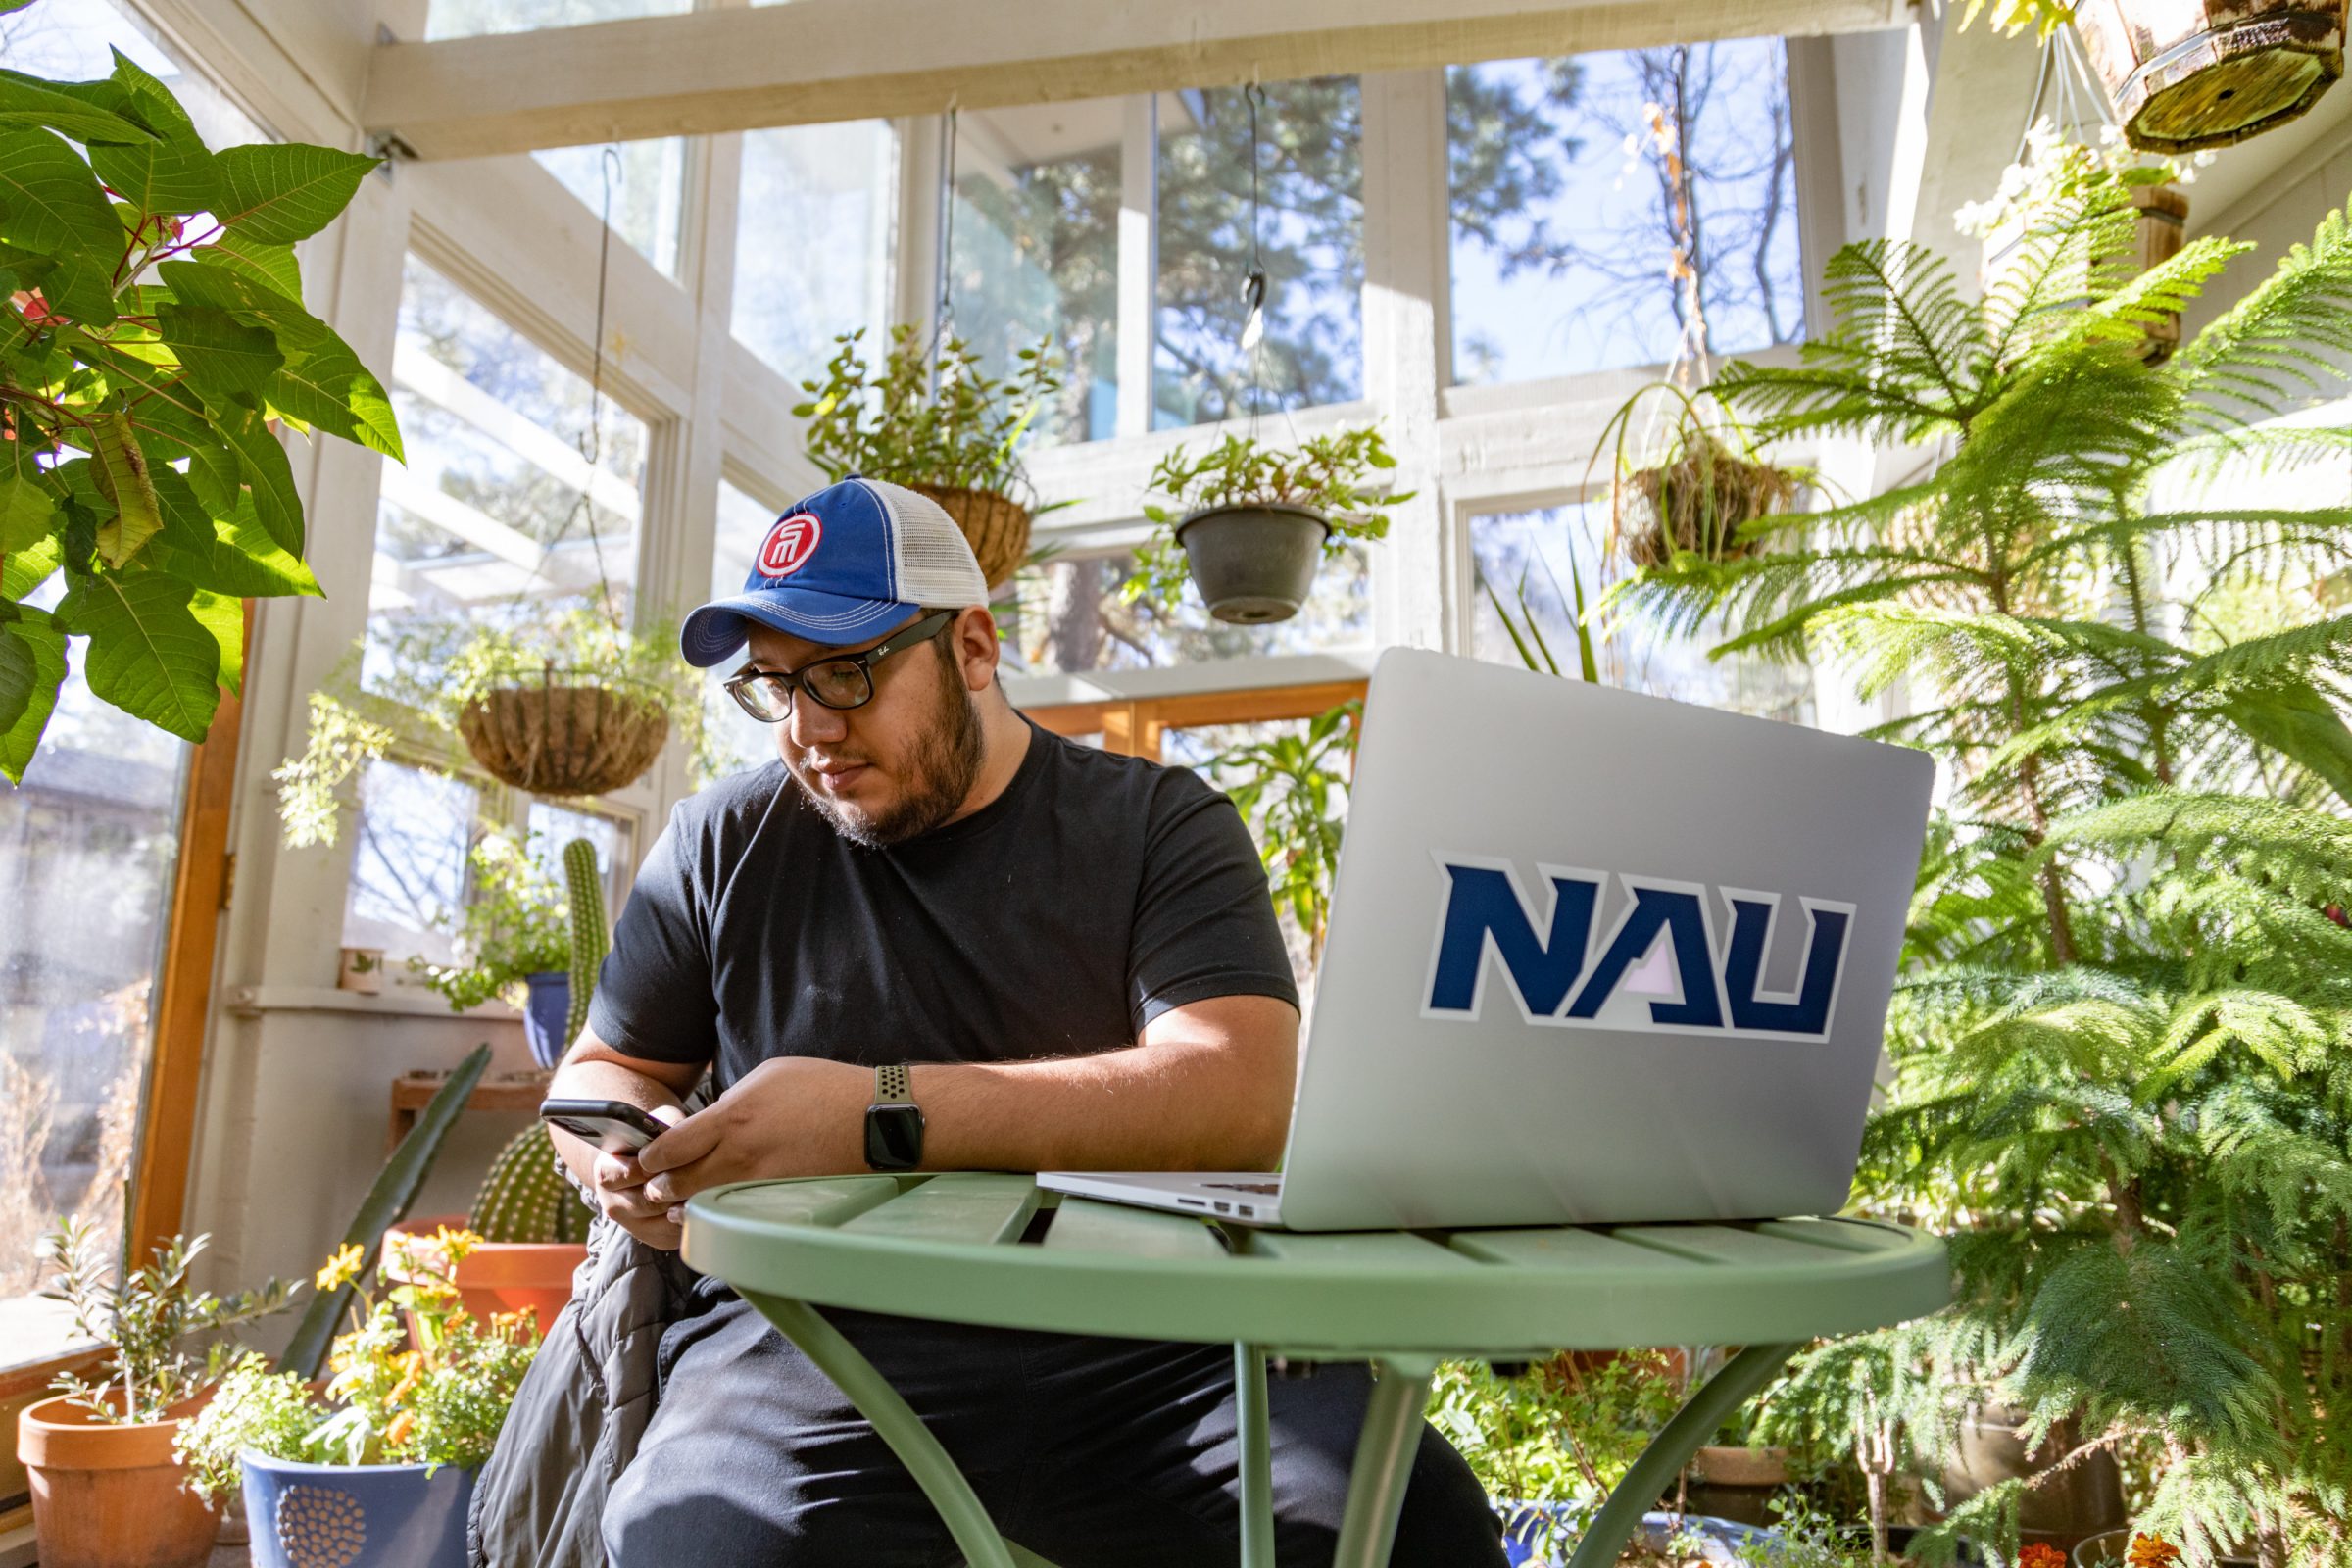 A student looks at his phone and laptop while sitting in a greenhouse surrounded by plants.